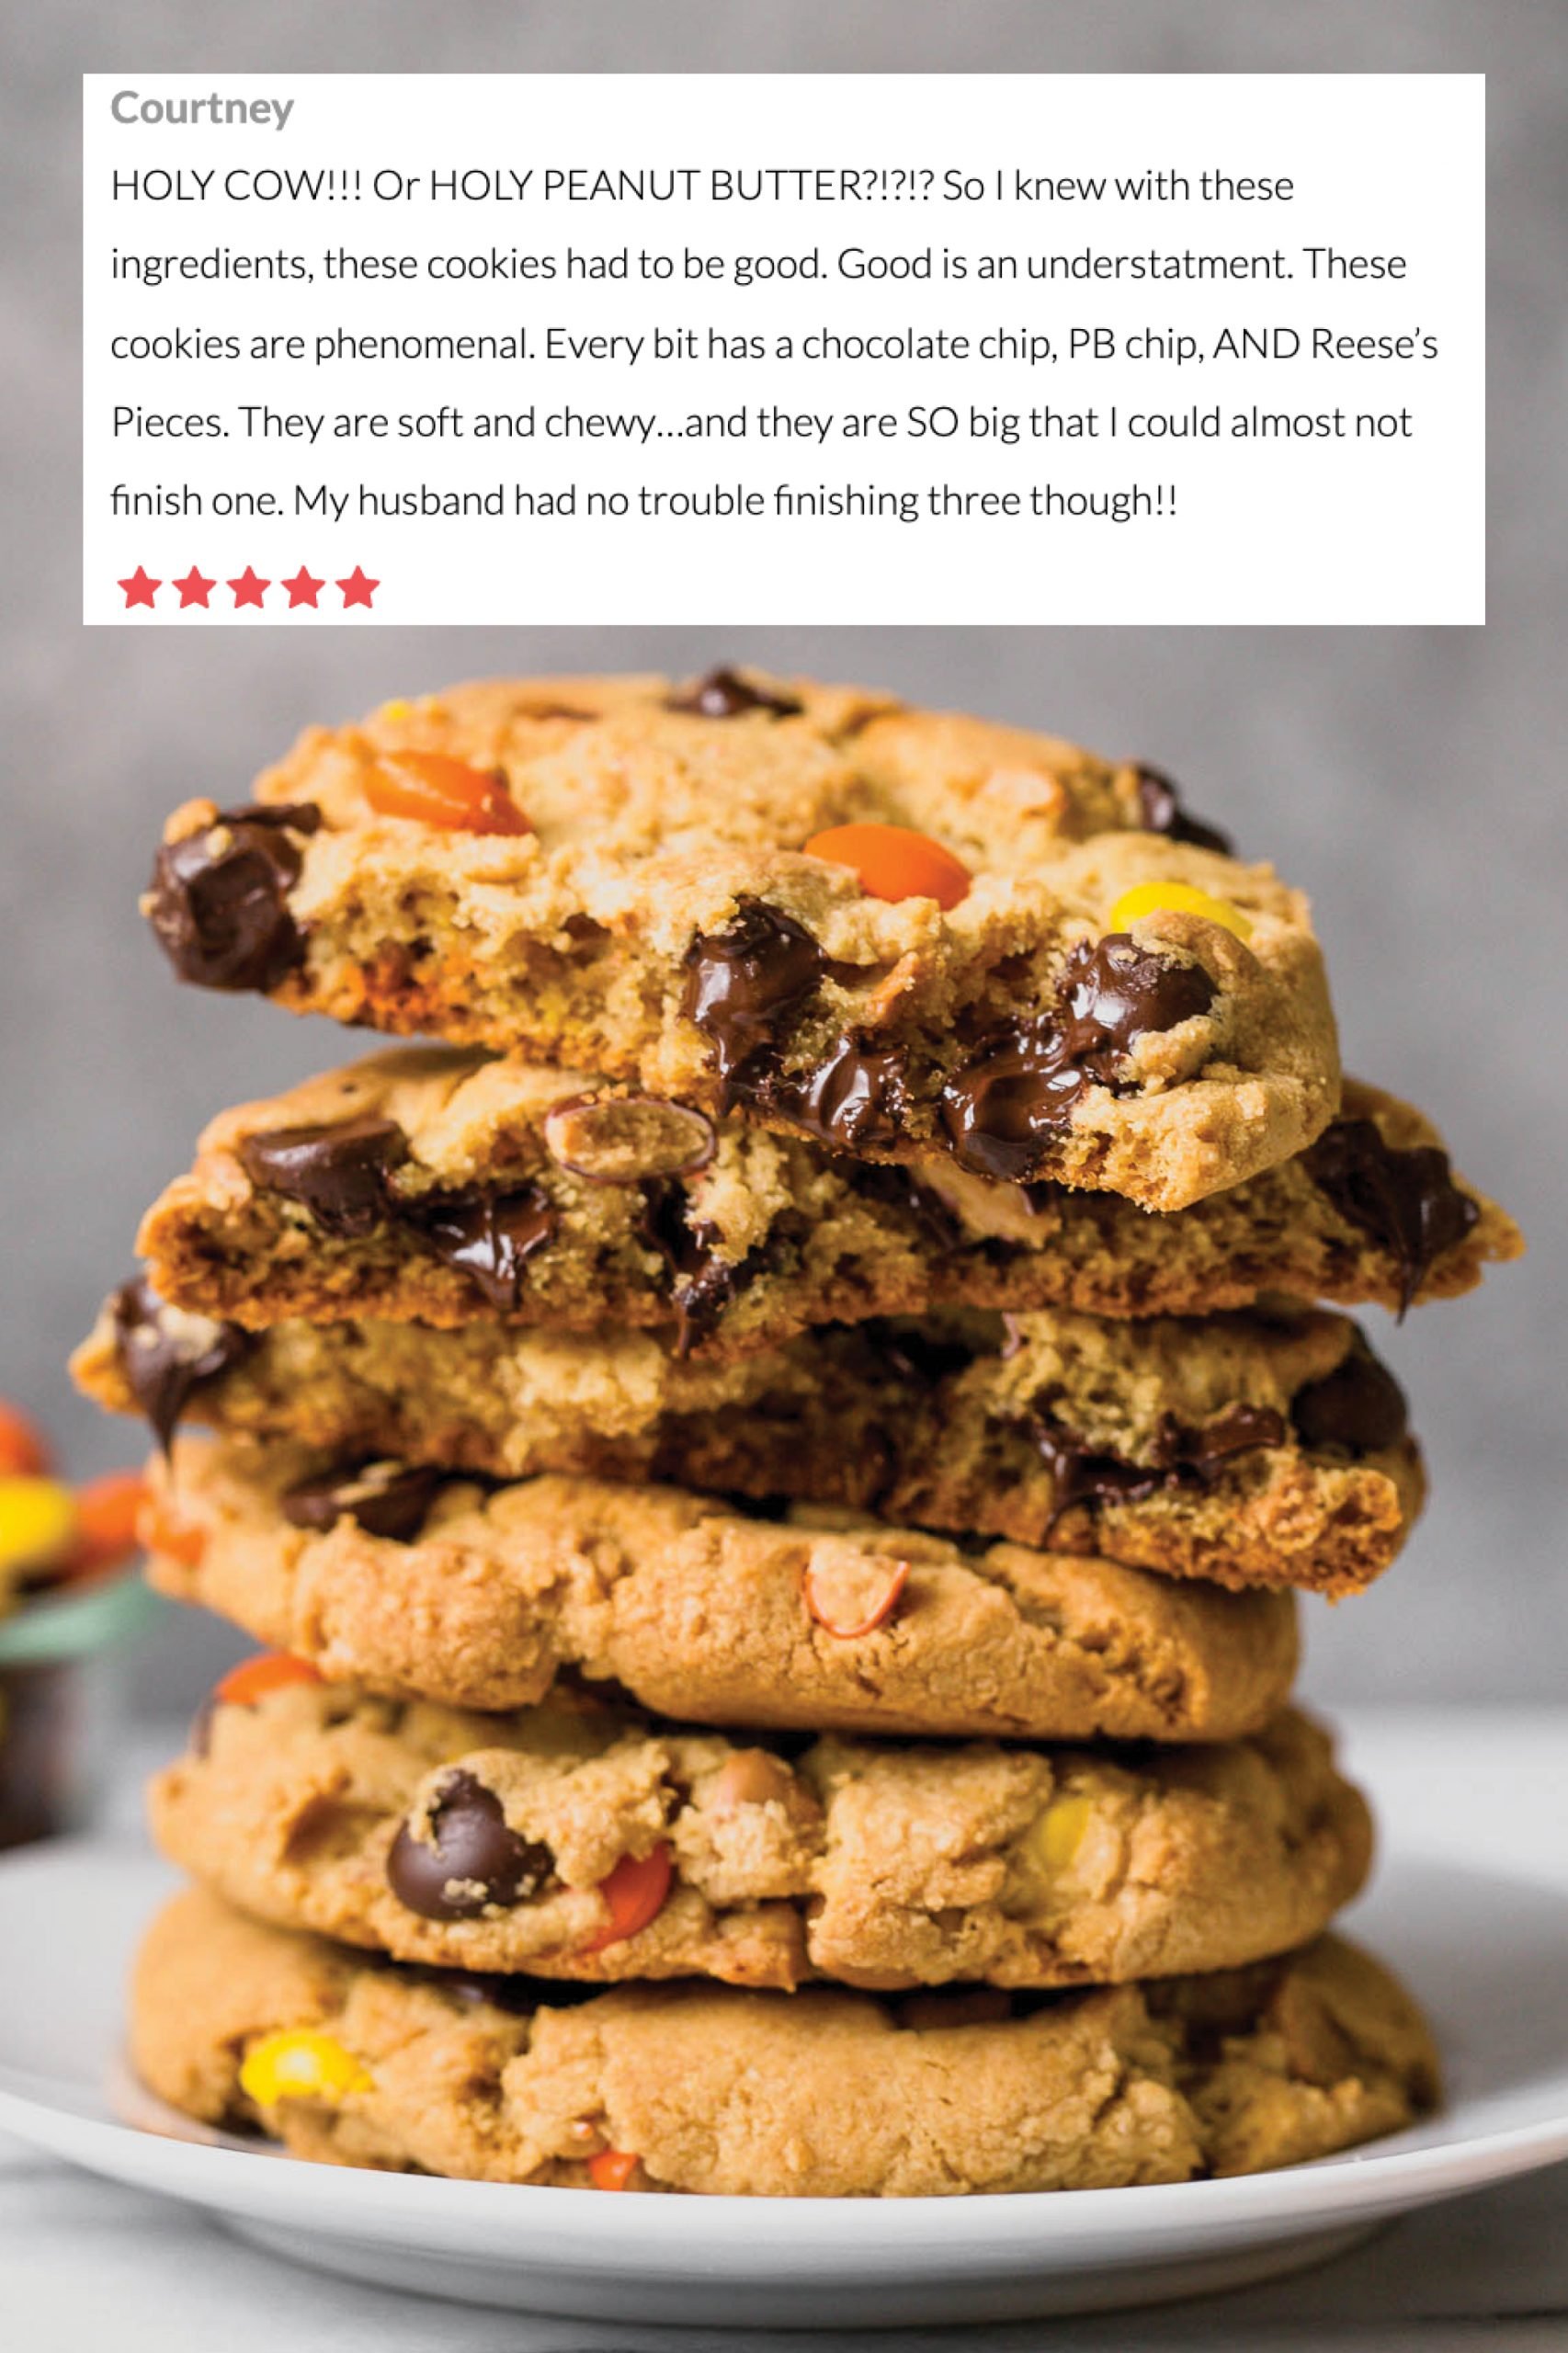 Giant Reese's Pieces Chocolate Chip Cookies stacked on top of each other, on a plate. The ultimate PB easy dessert recipe.